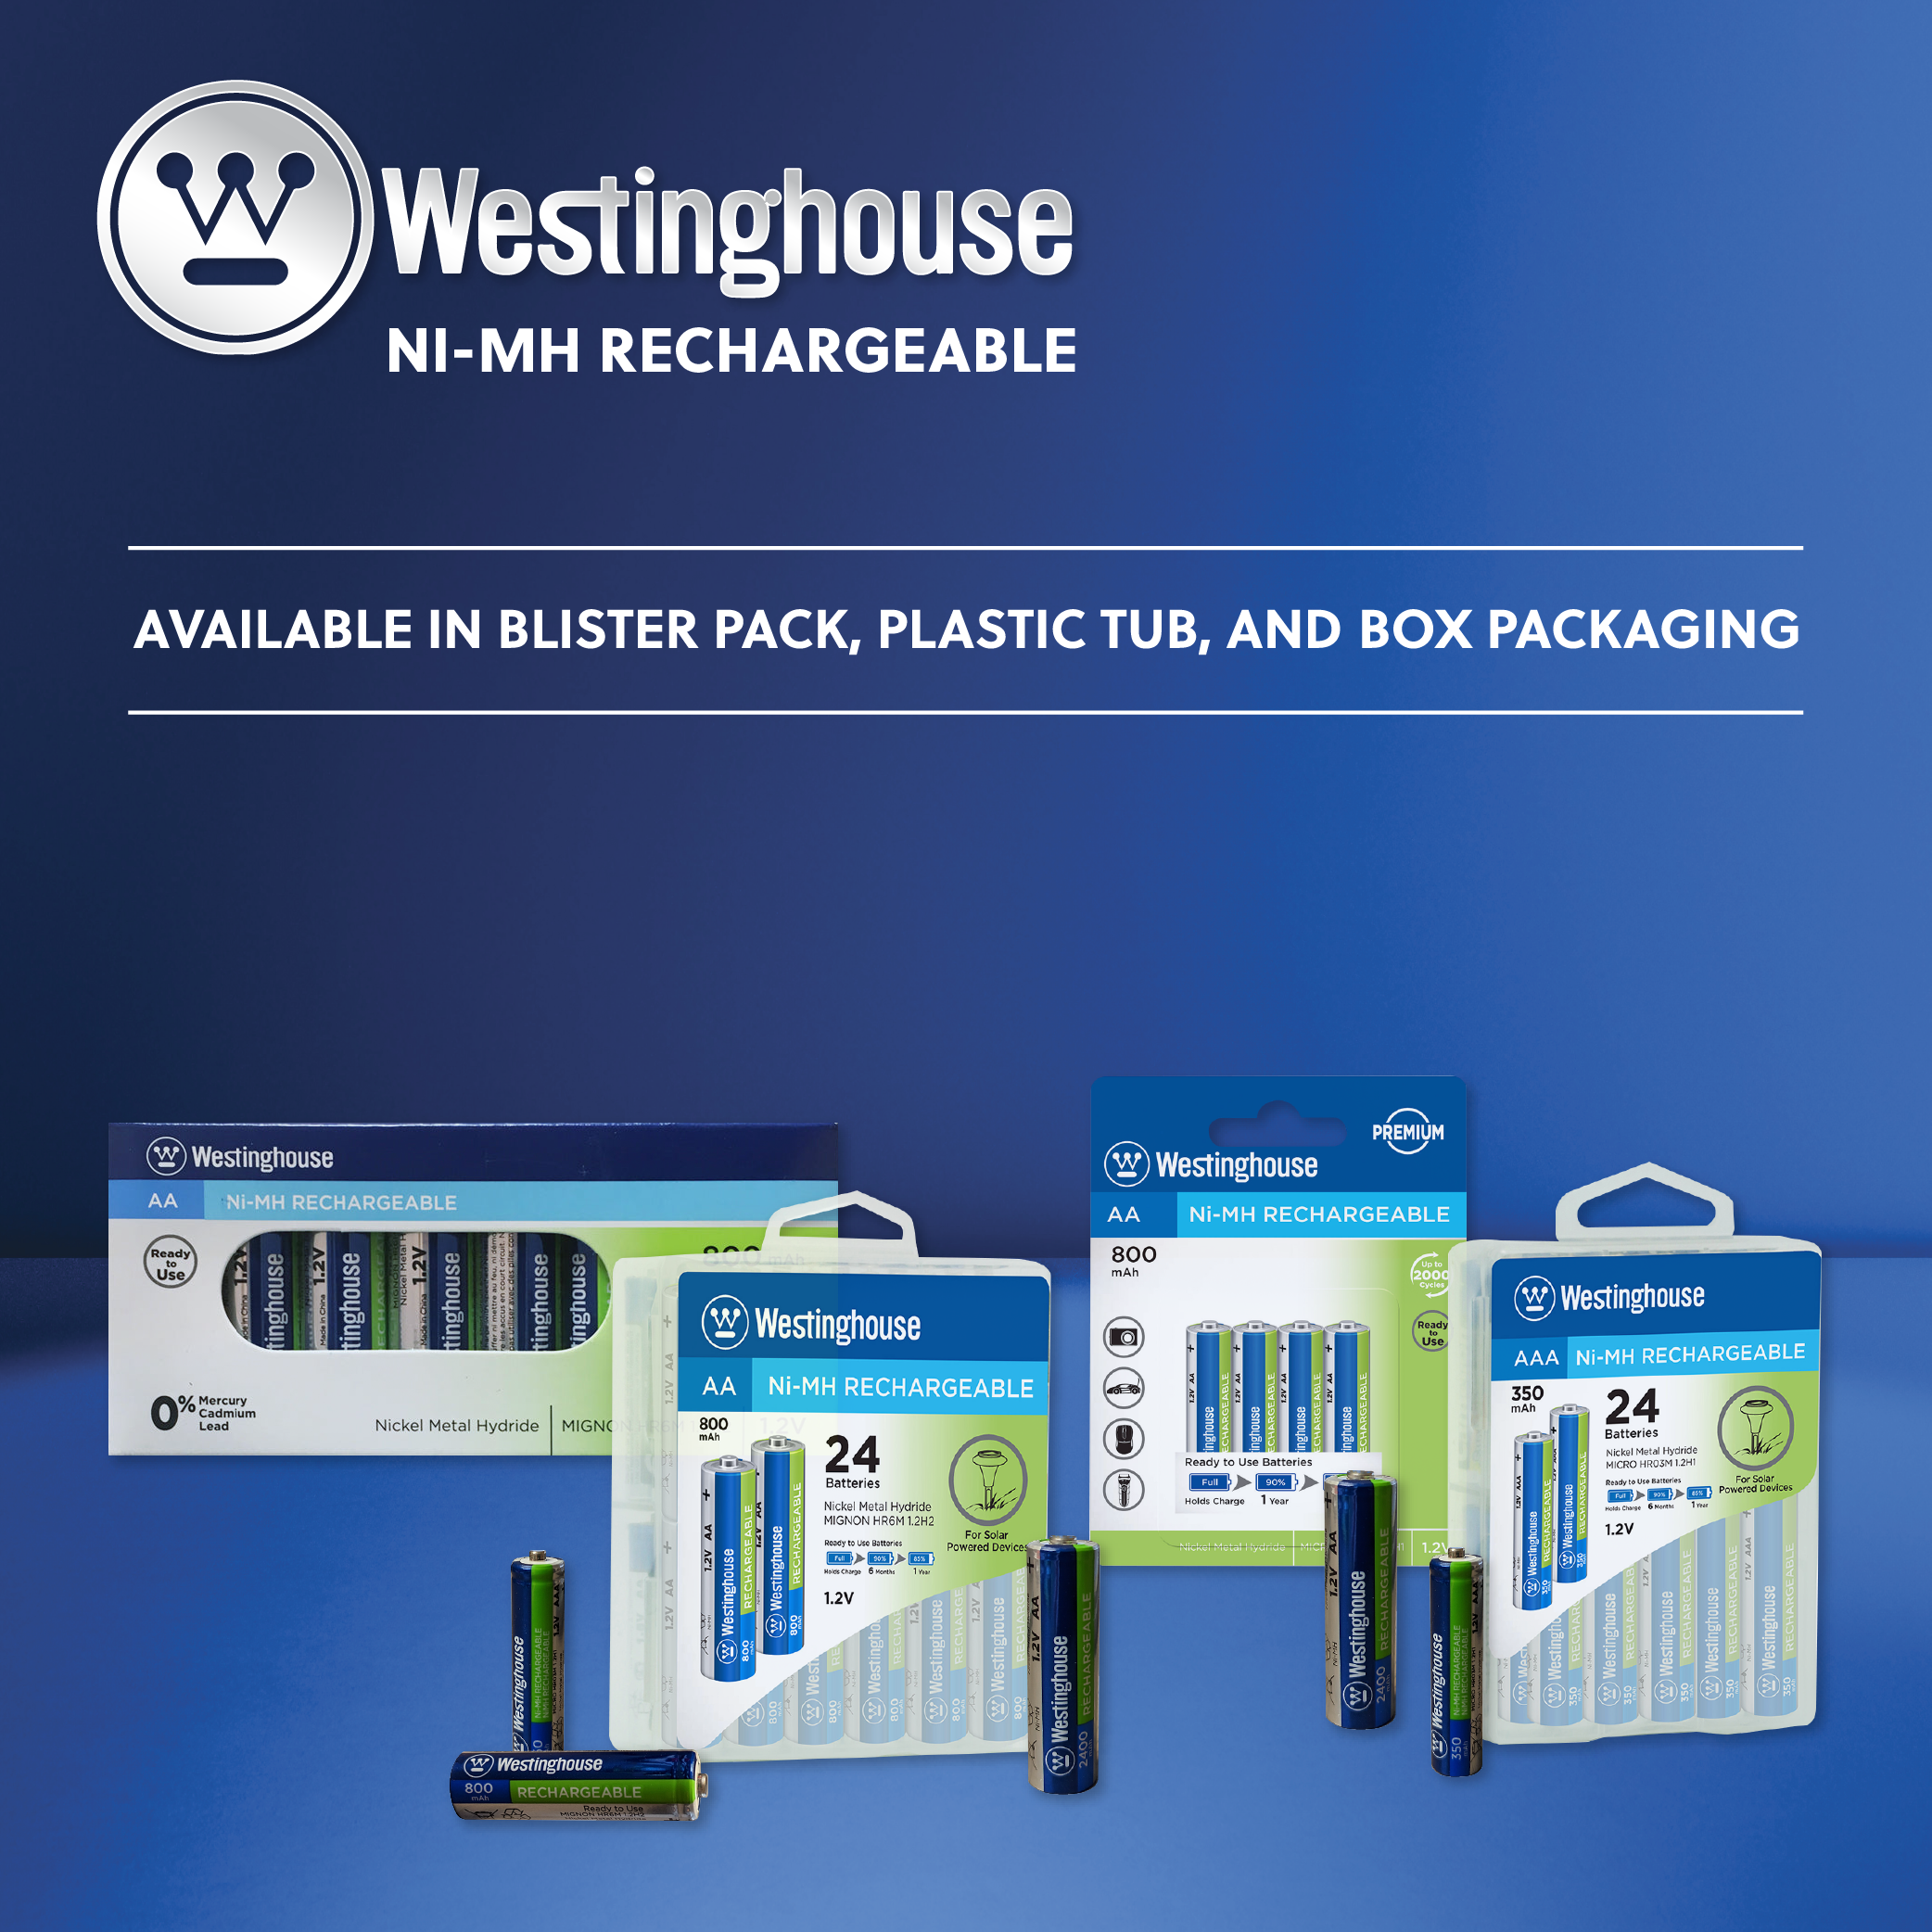 Westinghouse Always Ready AAA Ni-Mh 800mah Rechargeable Battery 4pk